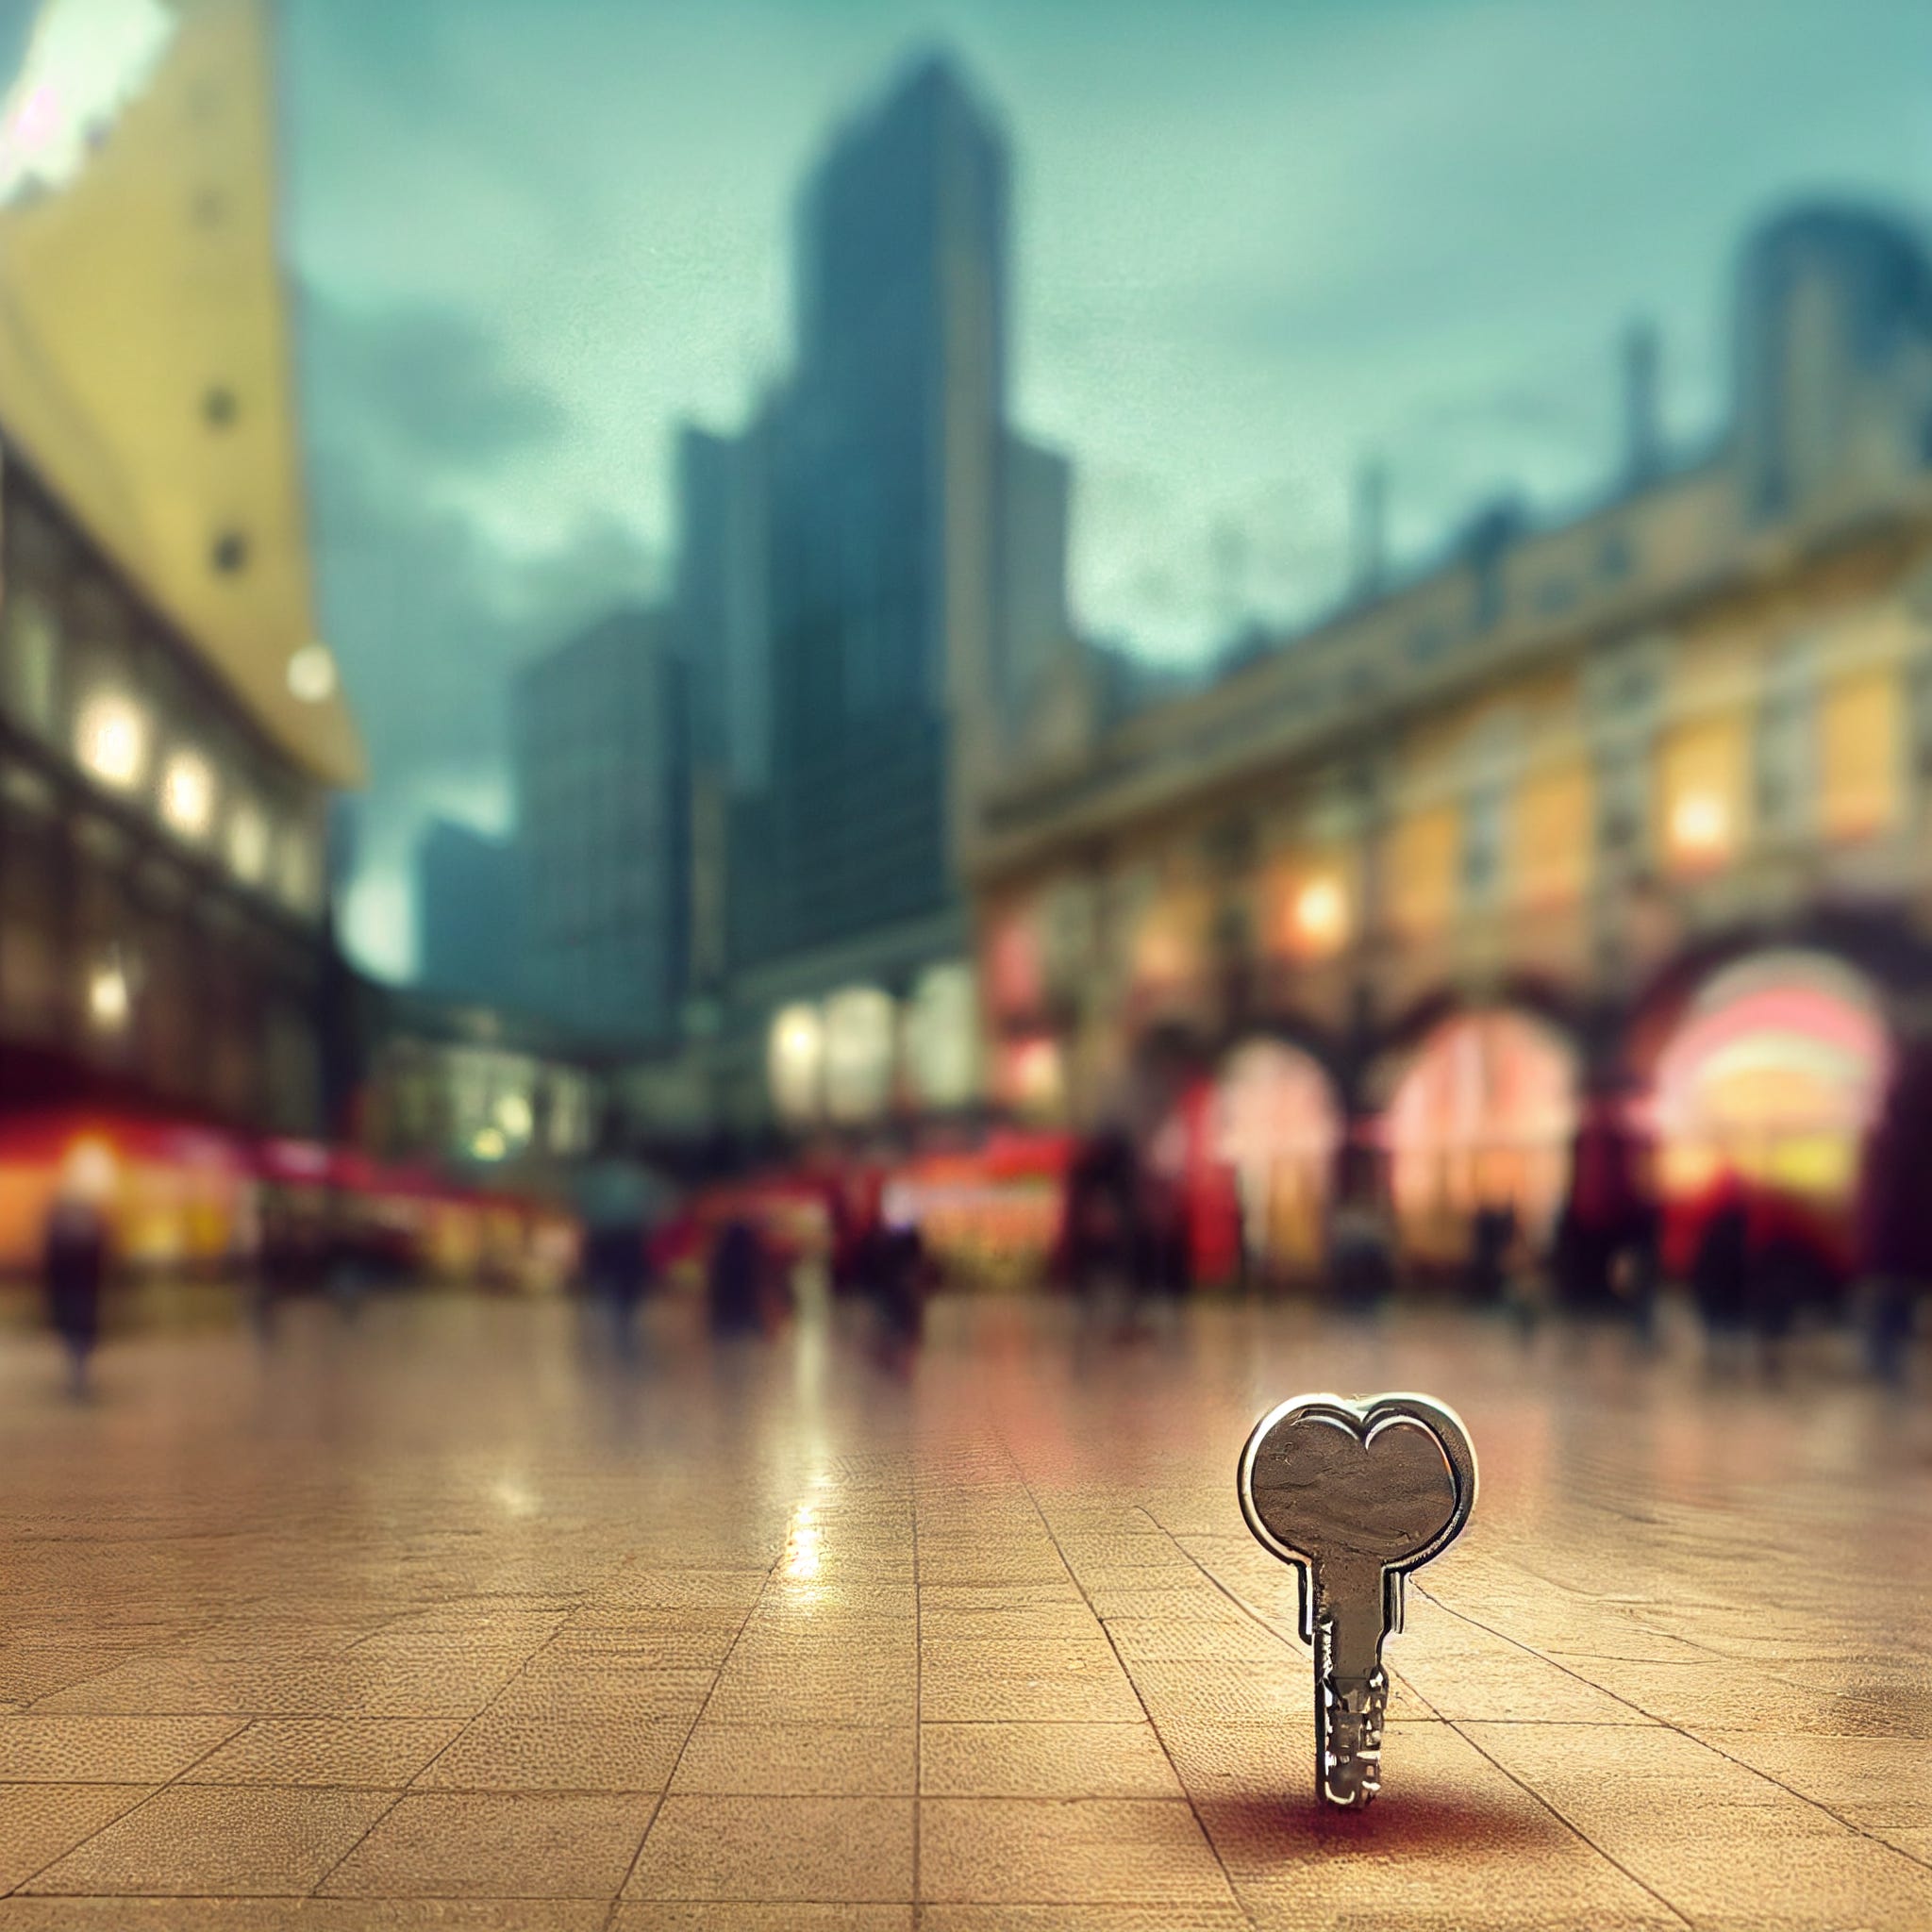 A picture of a key on the ground in front of a blurred city backdrop.